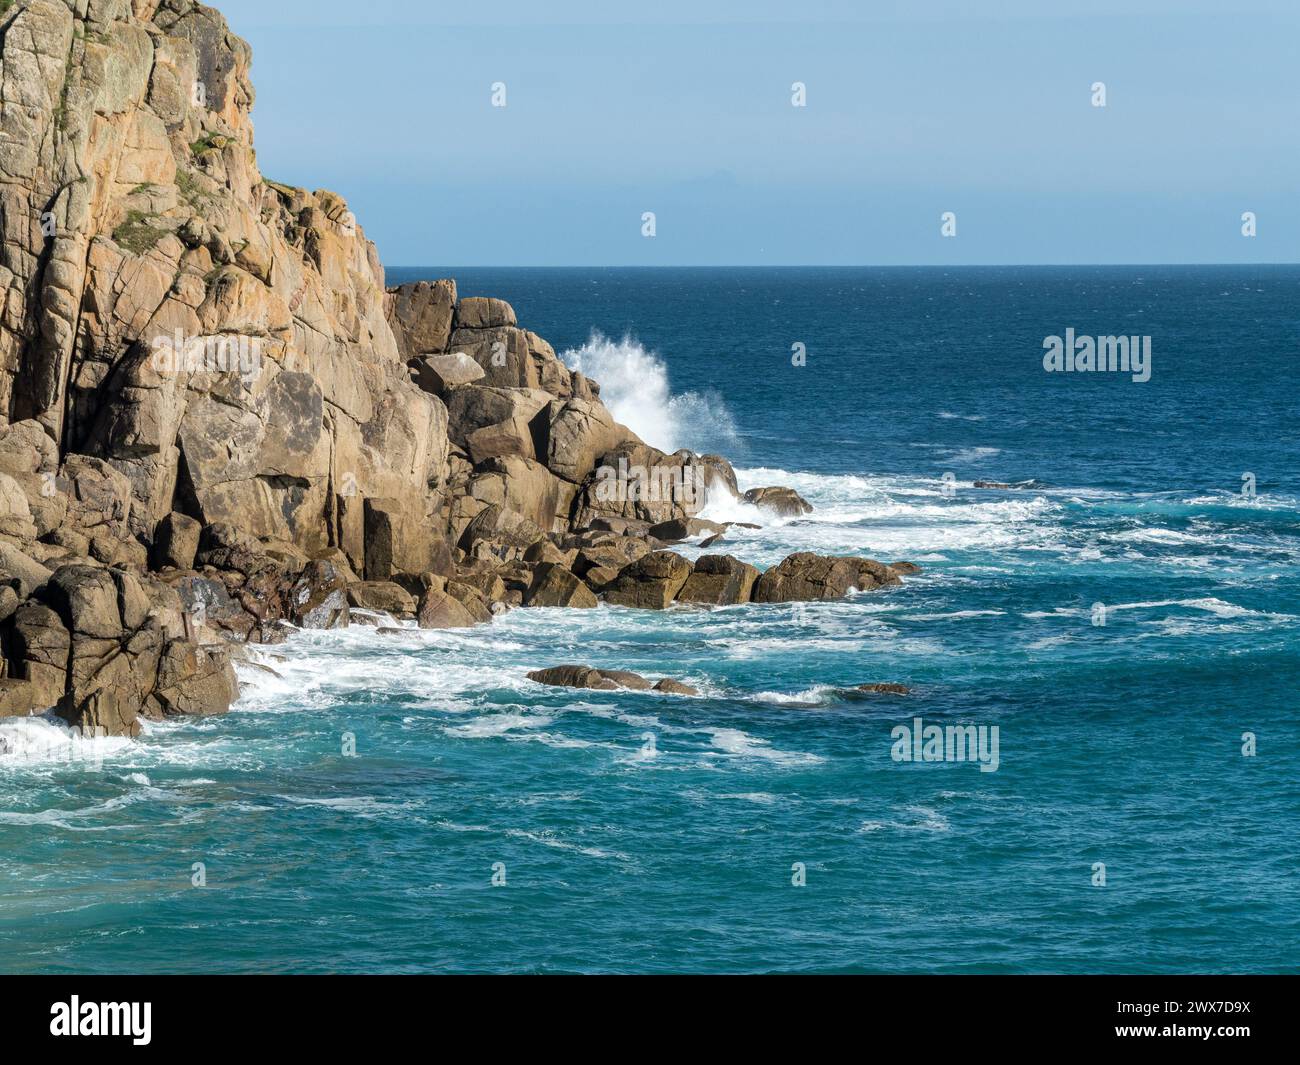 Waves breaking on rocky Cornish granite headland near Porthcurno on a sunny day with clear blue sky, Cornwall, England, UK Stock Photo